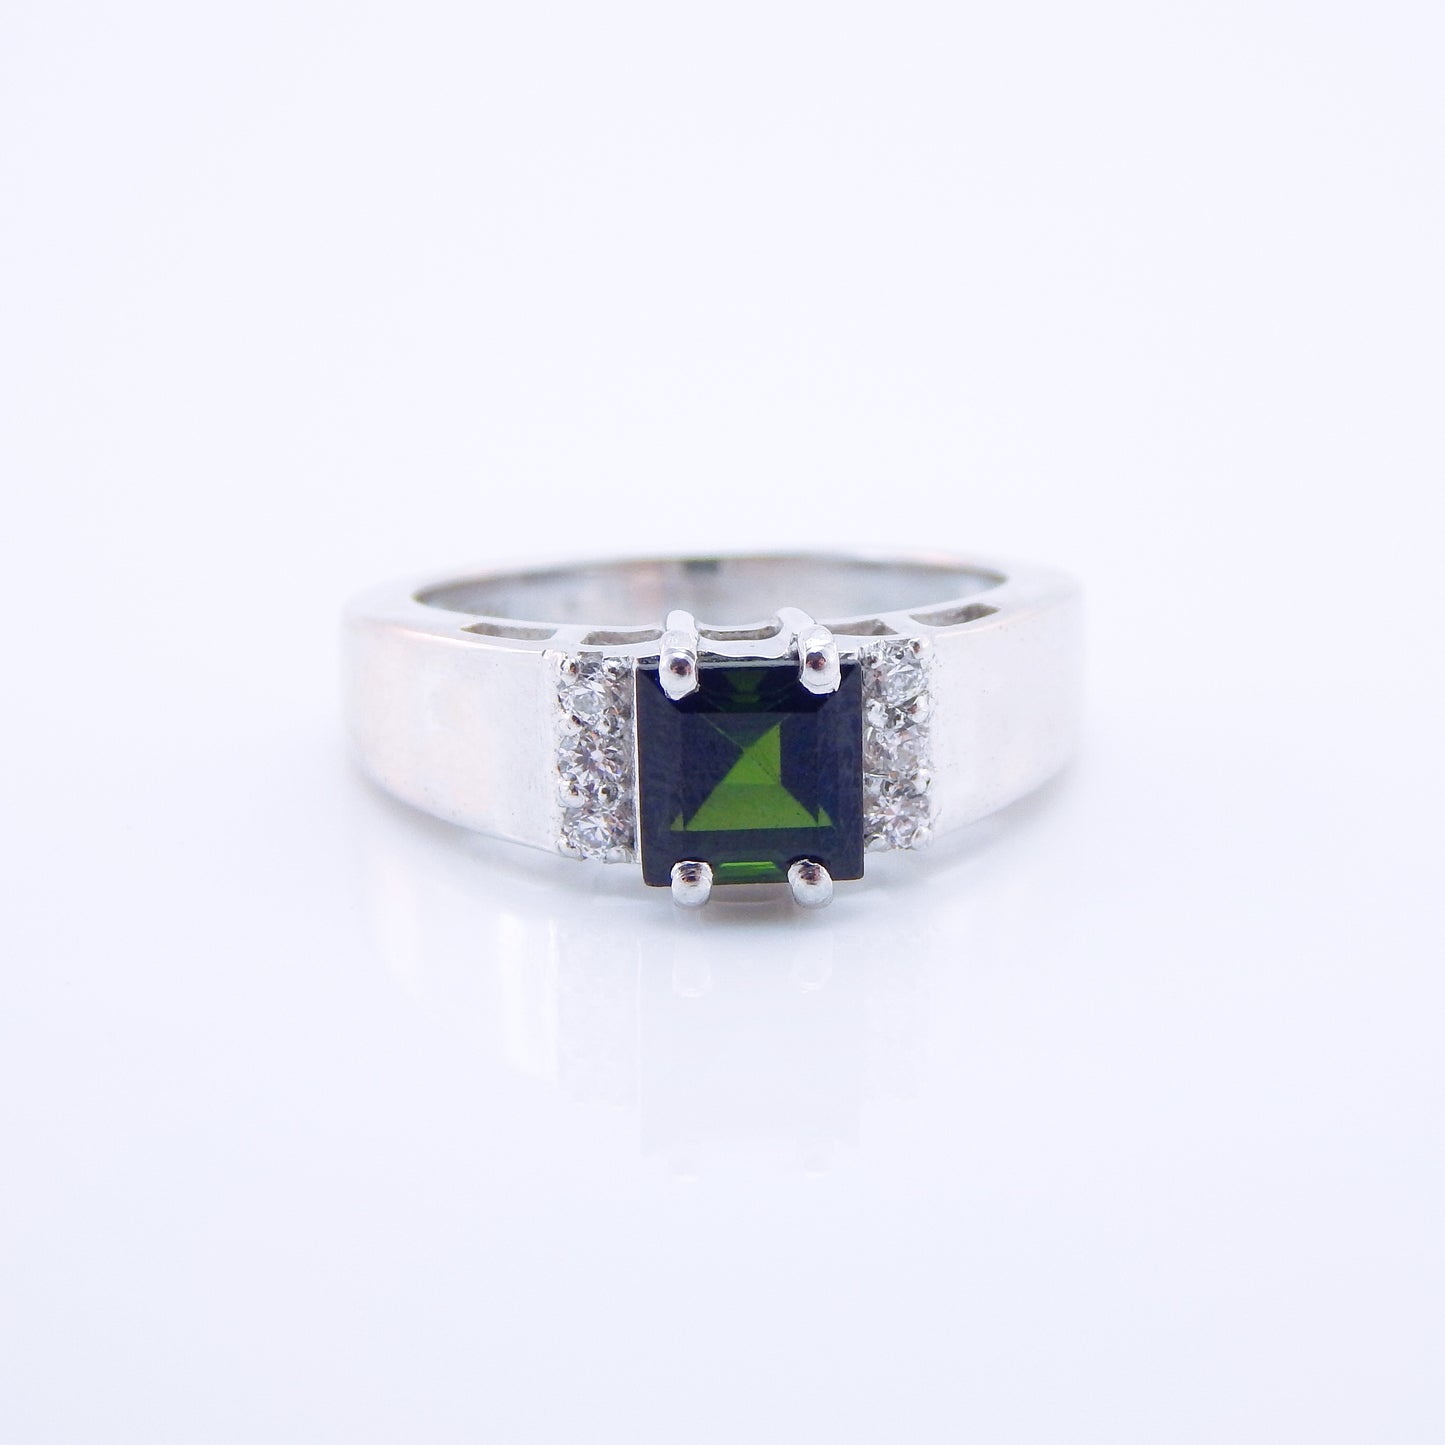 Genuine Green Tourmaline Cushion Cut Ring in 925 Sterling Silver